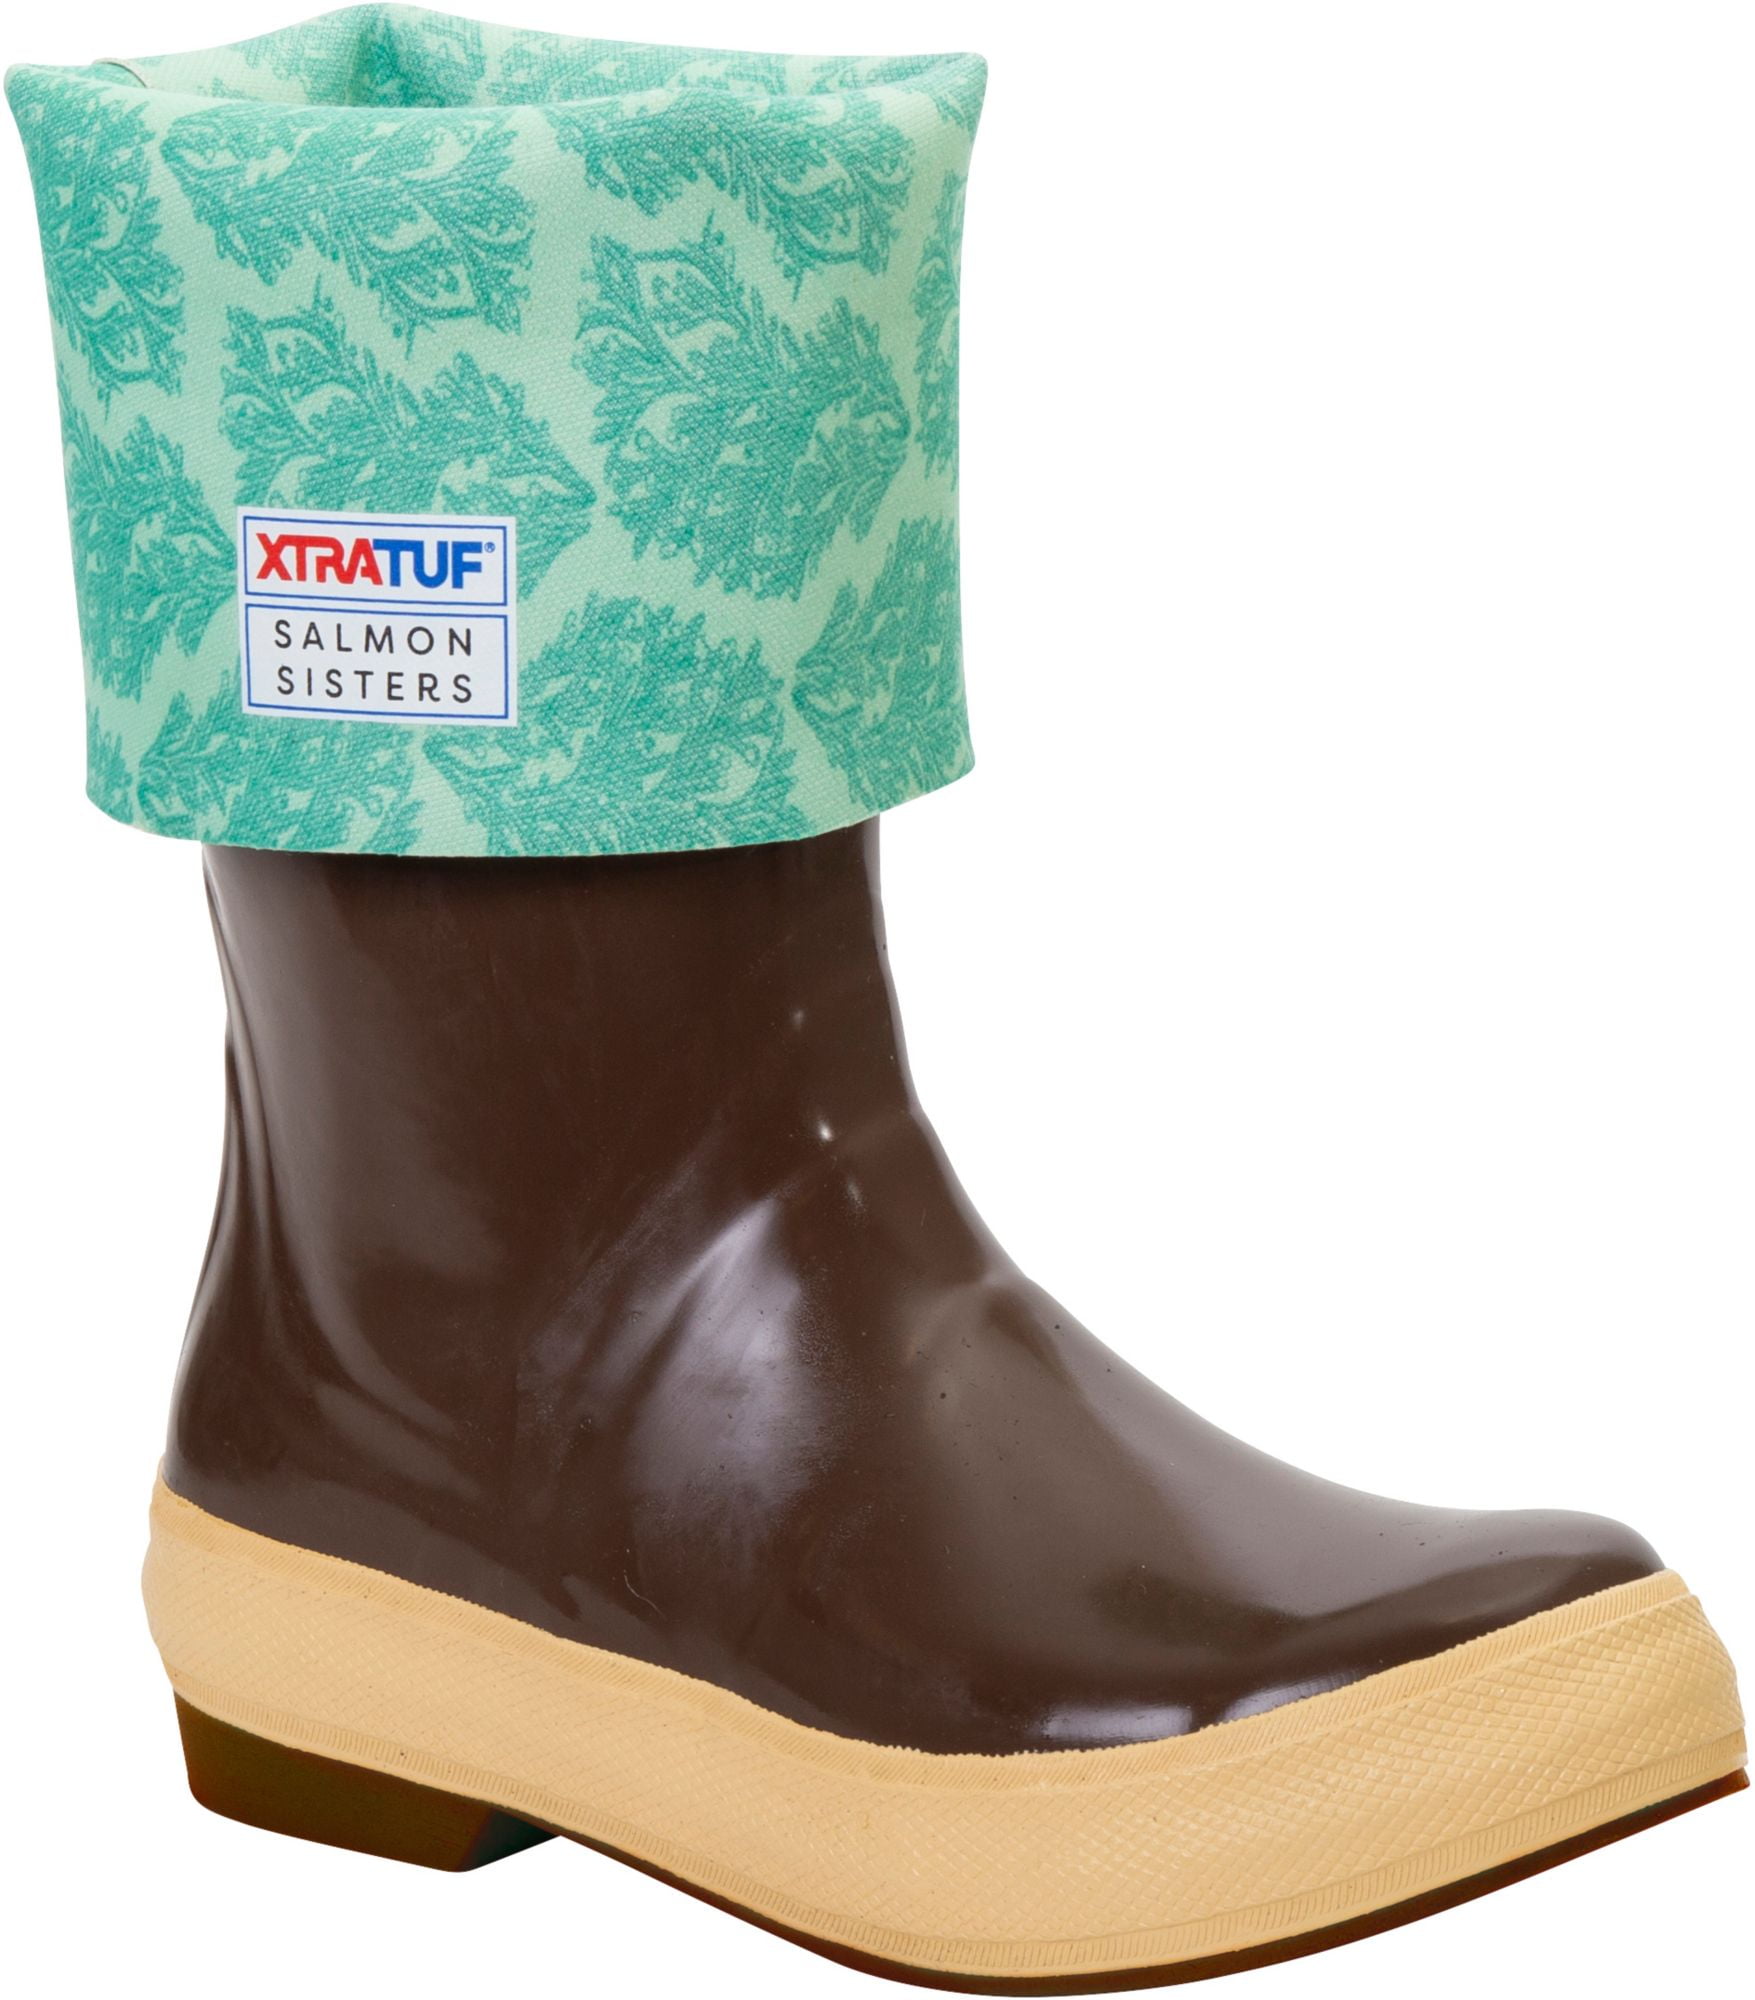 rubber boots from walmart